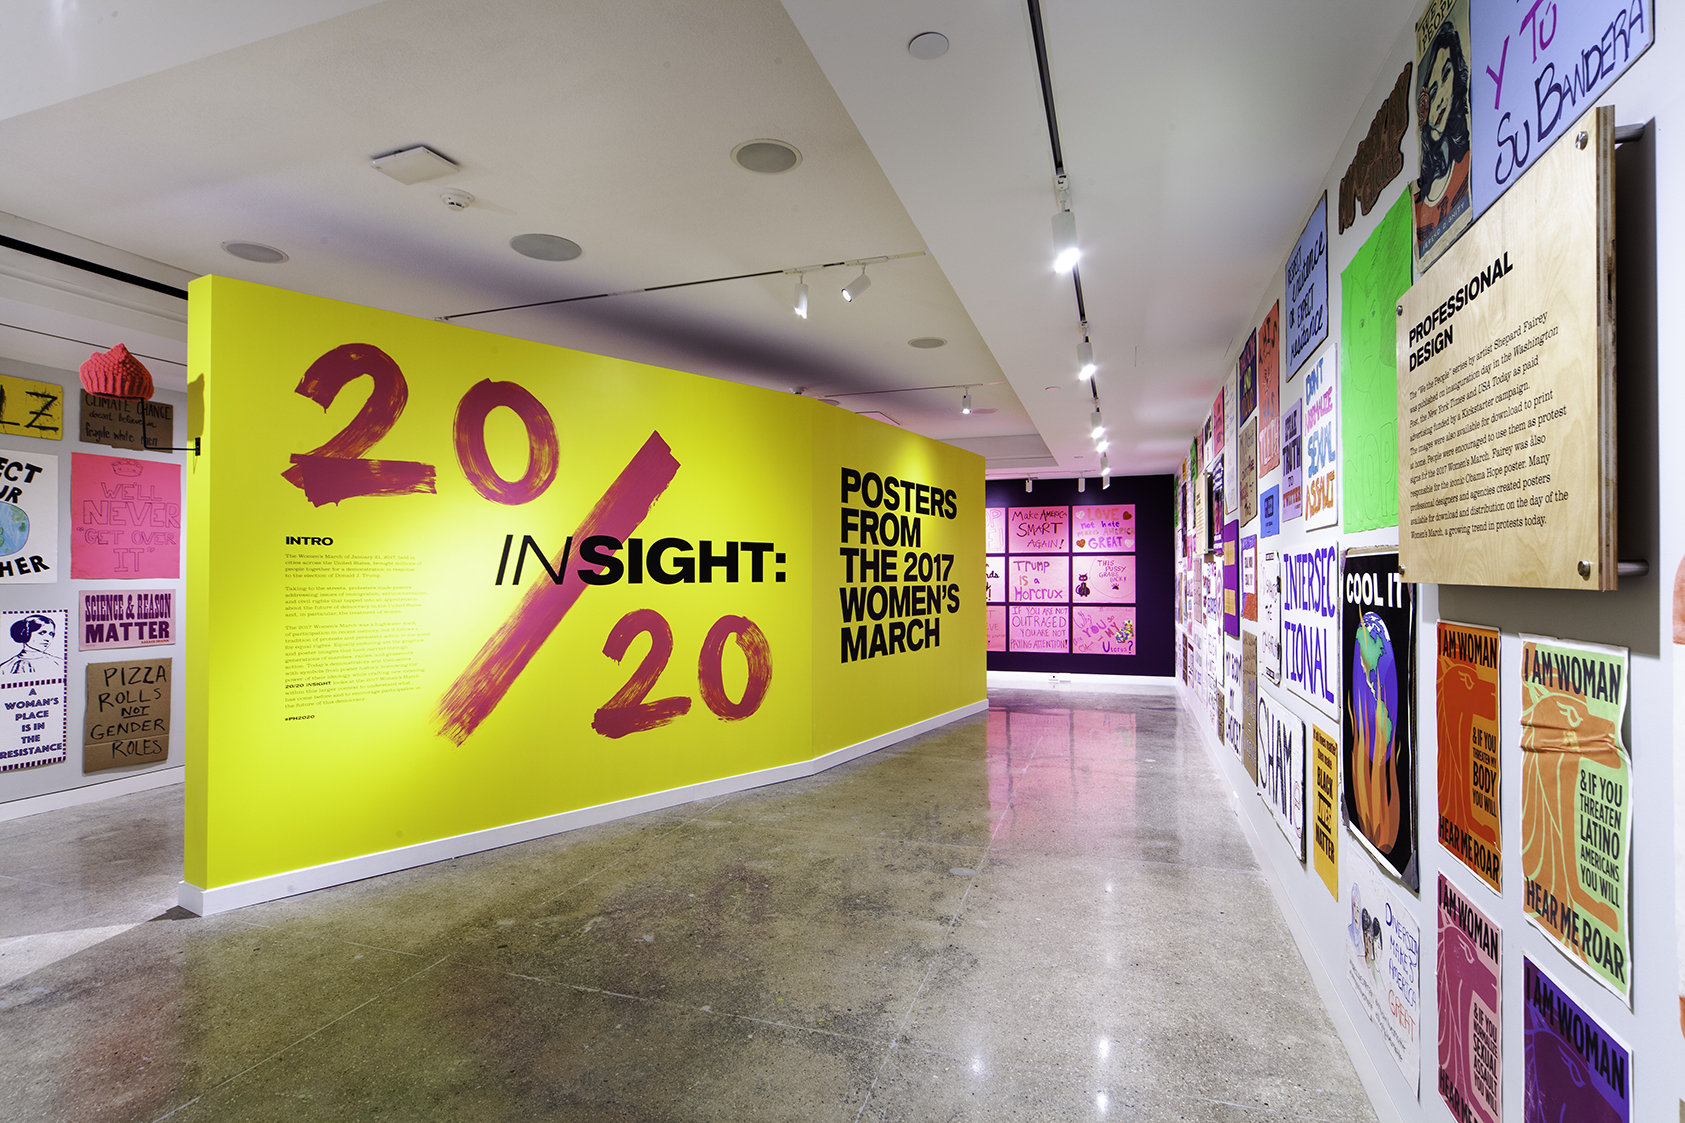 A yellow freestanding wall with pink and black text welcomes the guest into the mostly handwritten poster show.